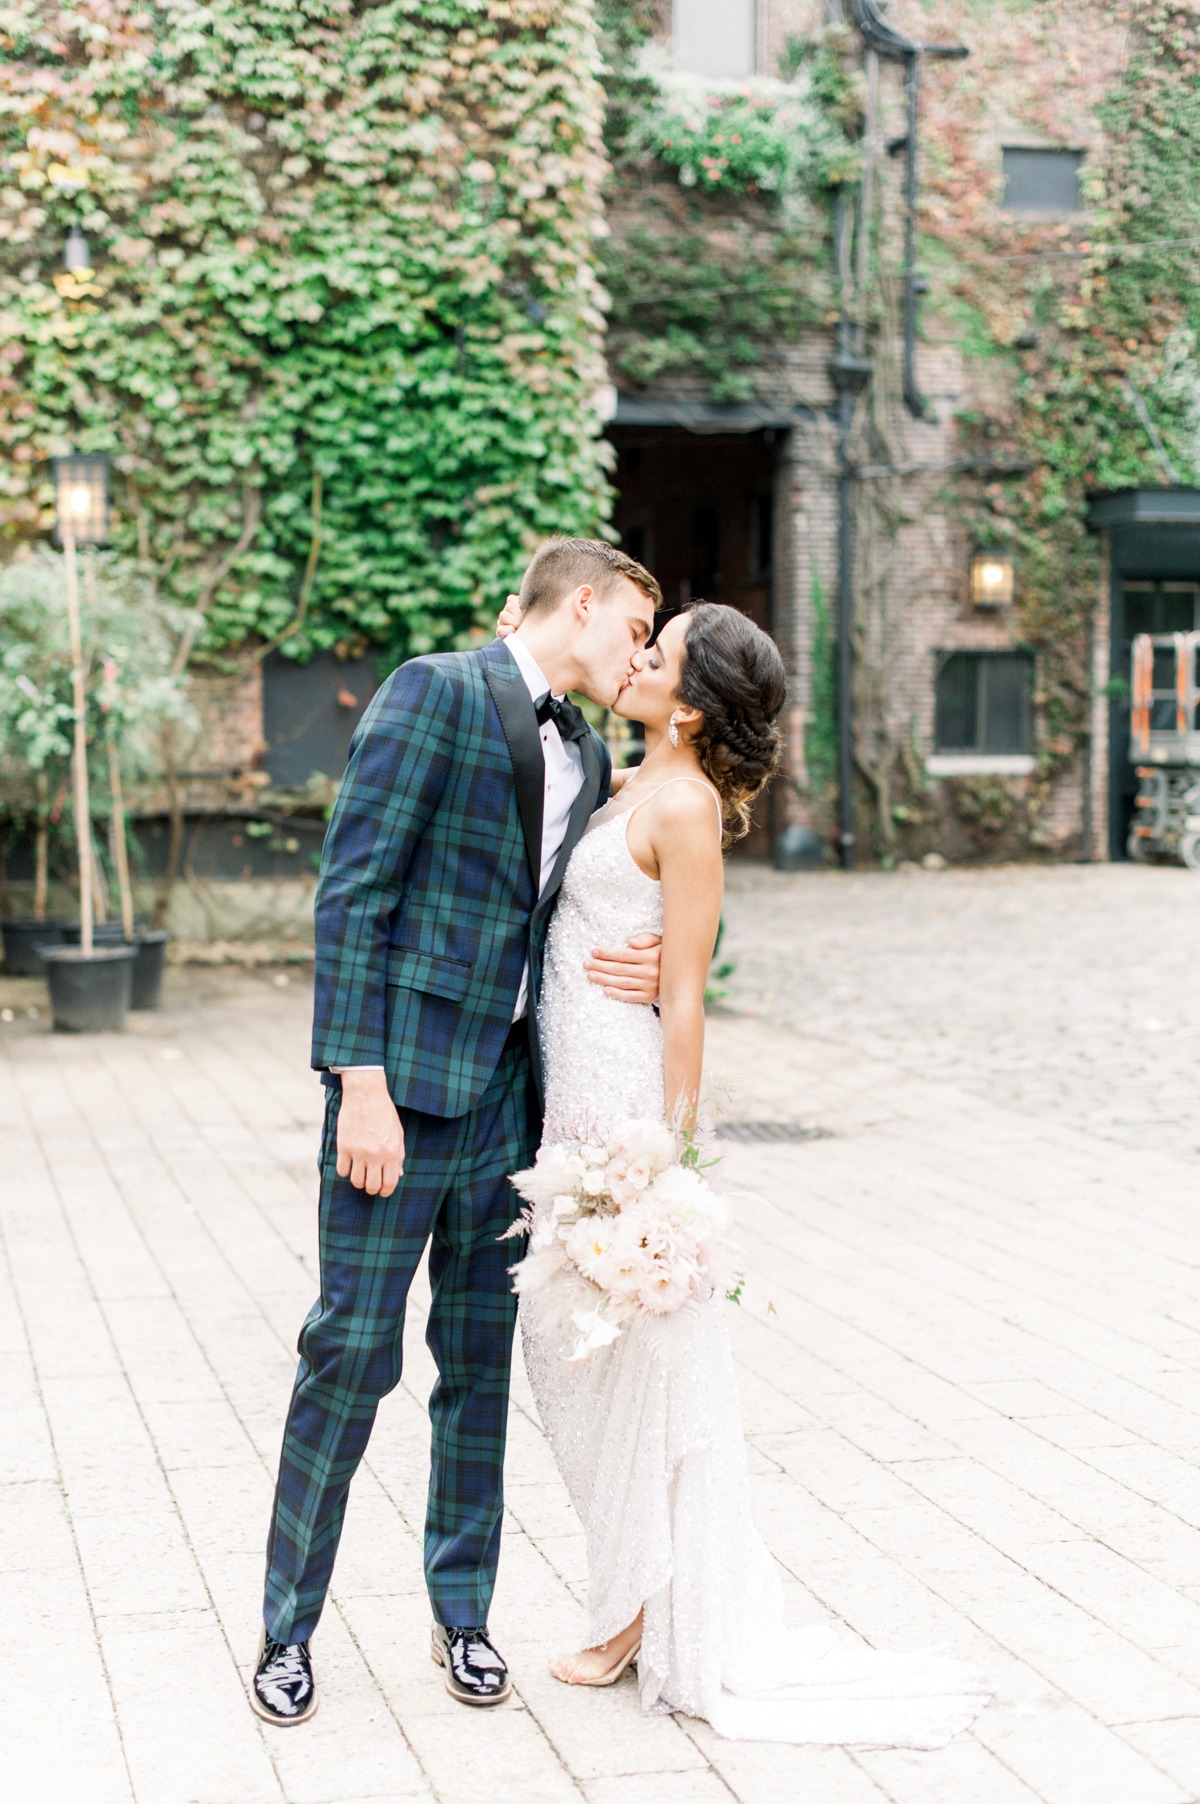 Plaid suit for the groom